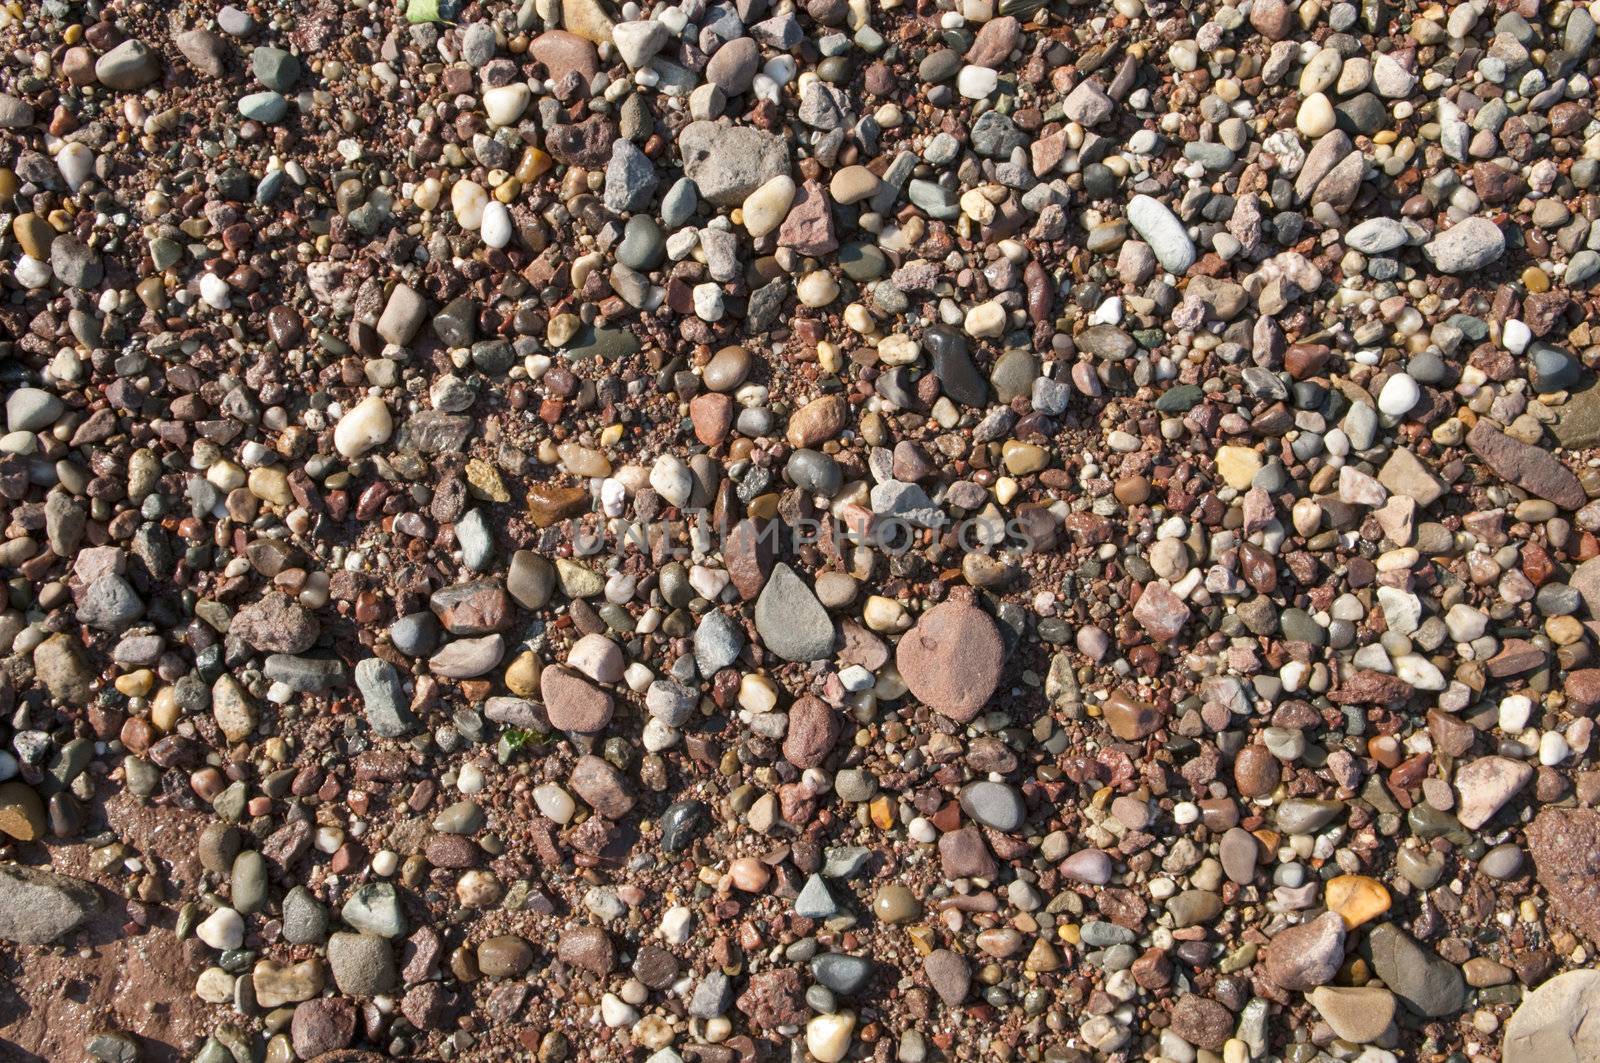 Background of small pebbles from the Bay of Fundy shoreline